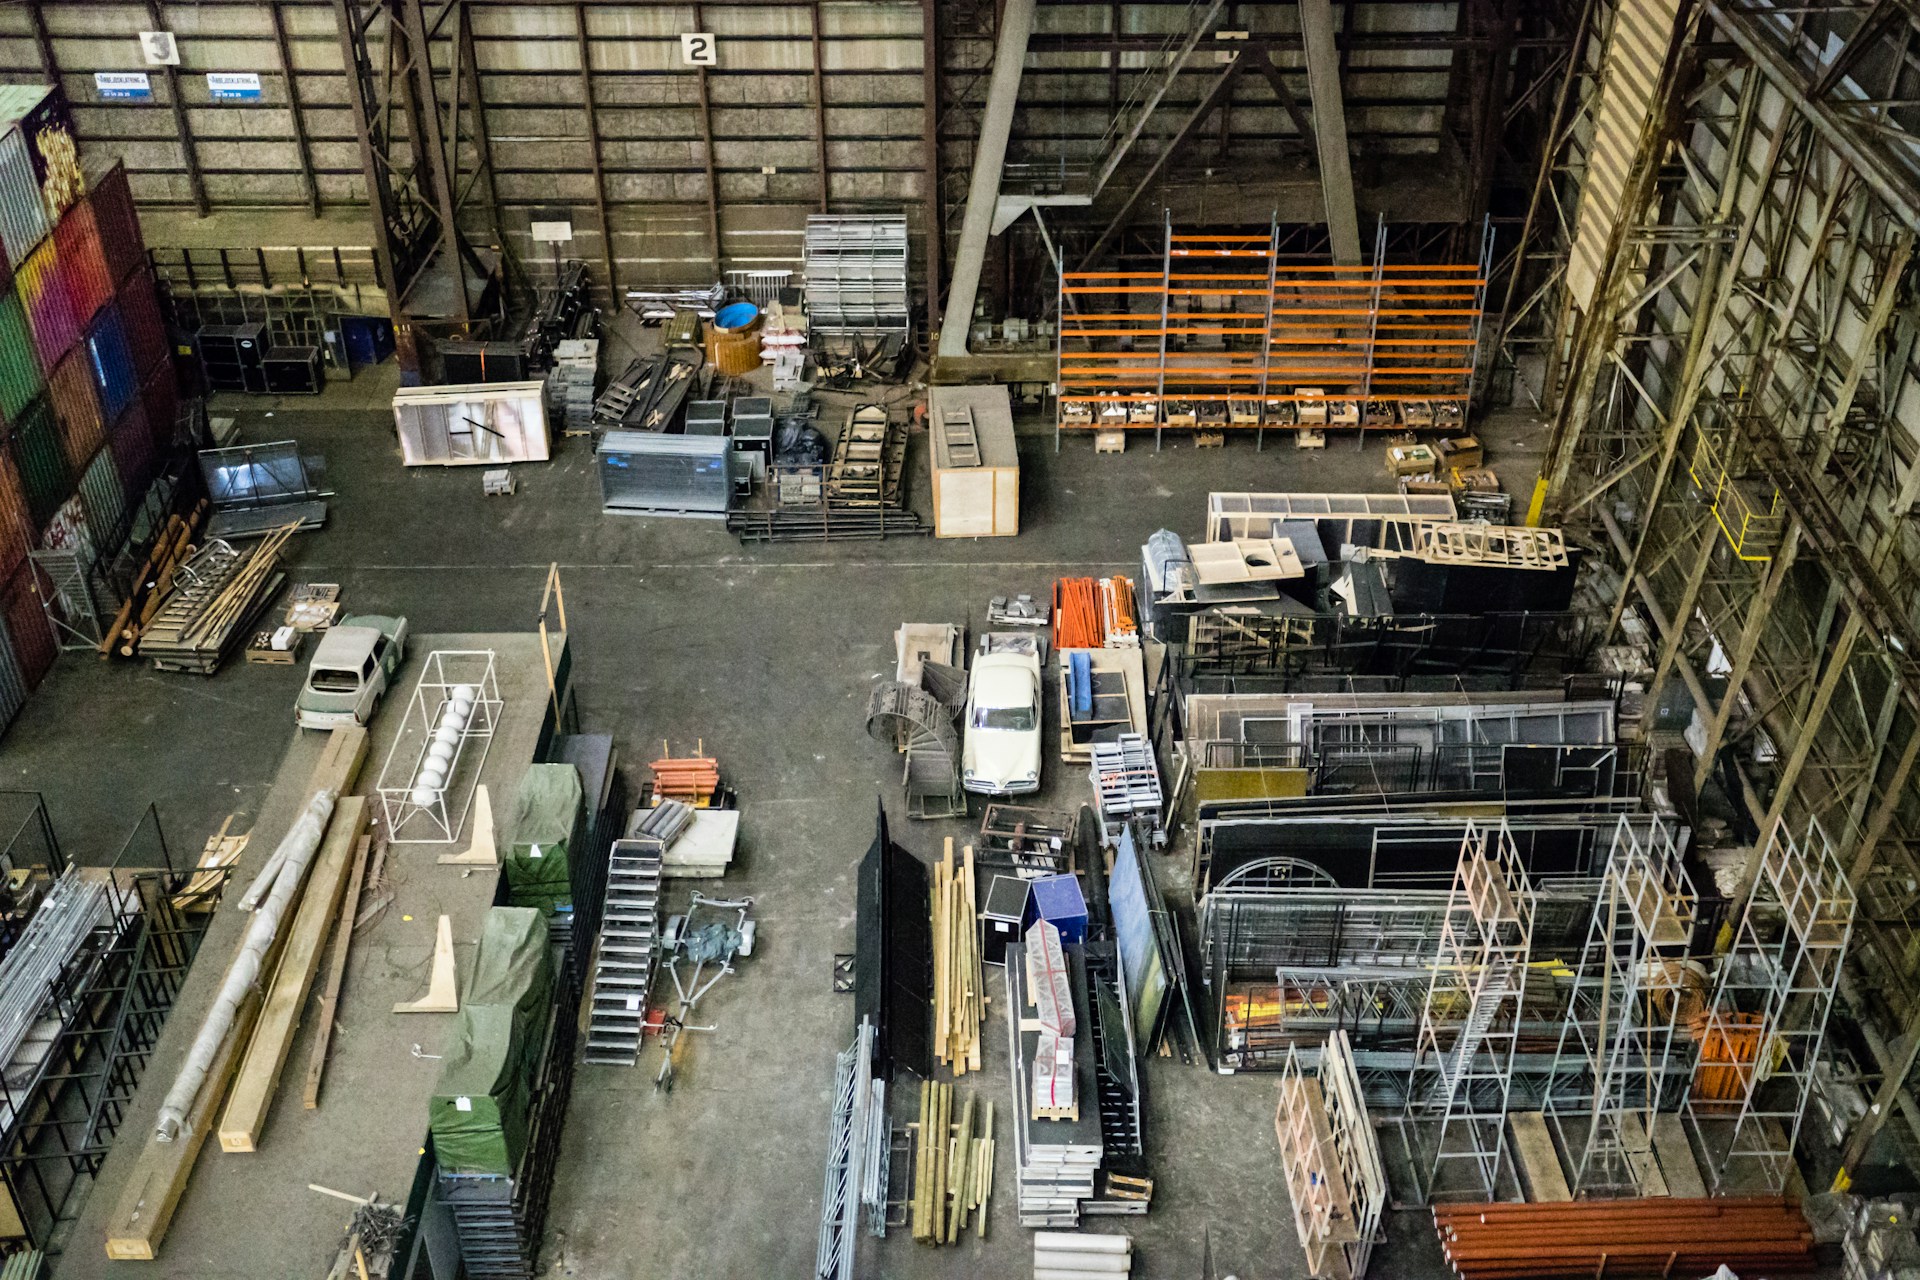 An ld warehouse going through the process of repurposing industrial spaces